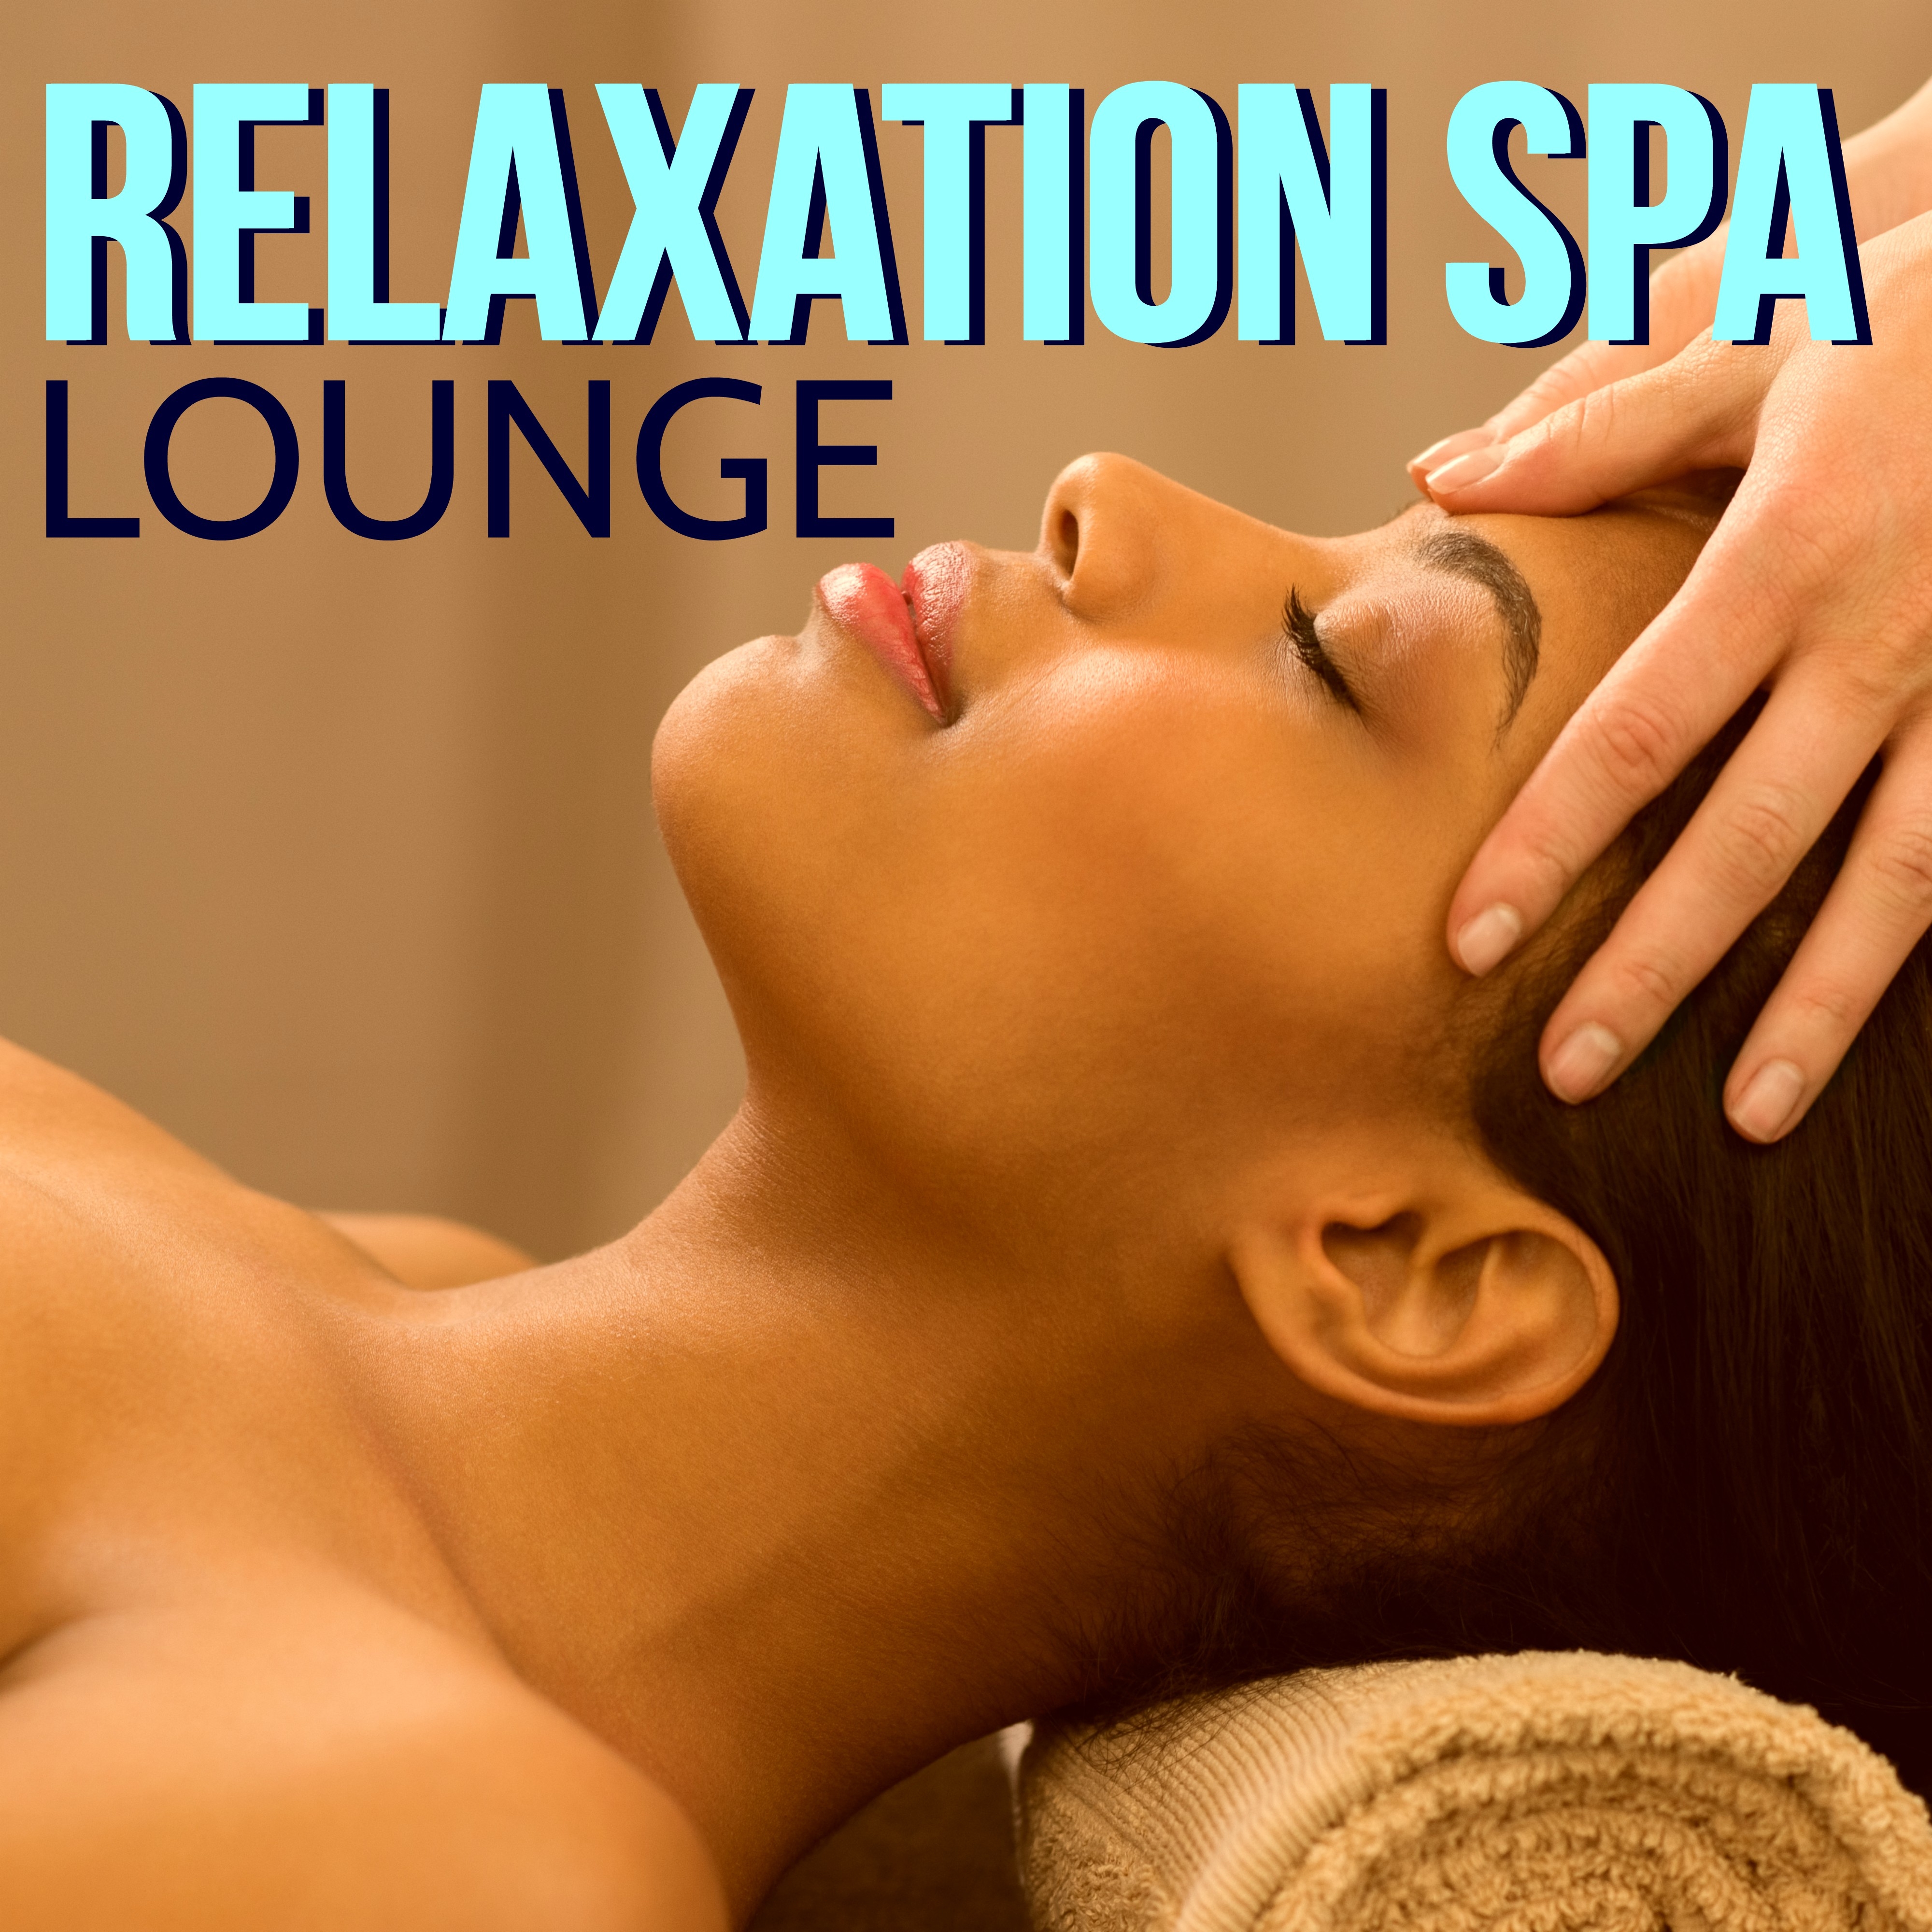 Relaxation Spa Lounge - Chillout Ambient Music & Chillax Lounge Music